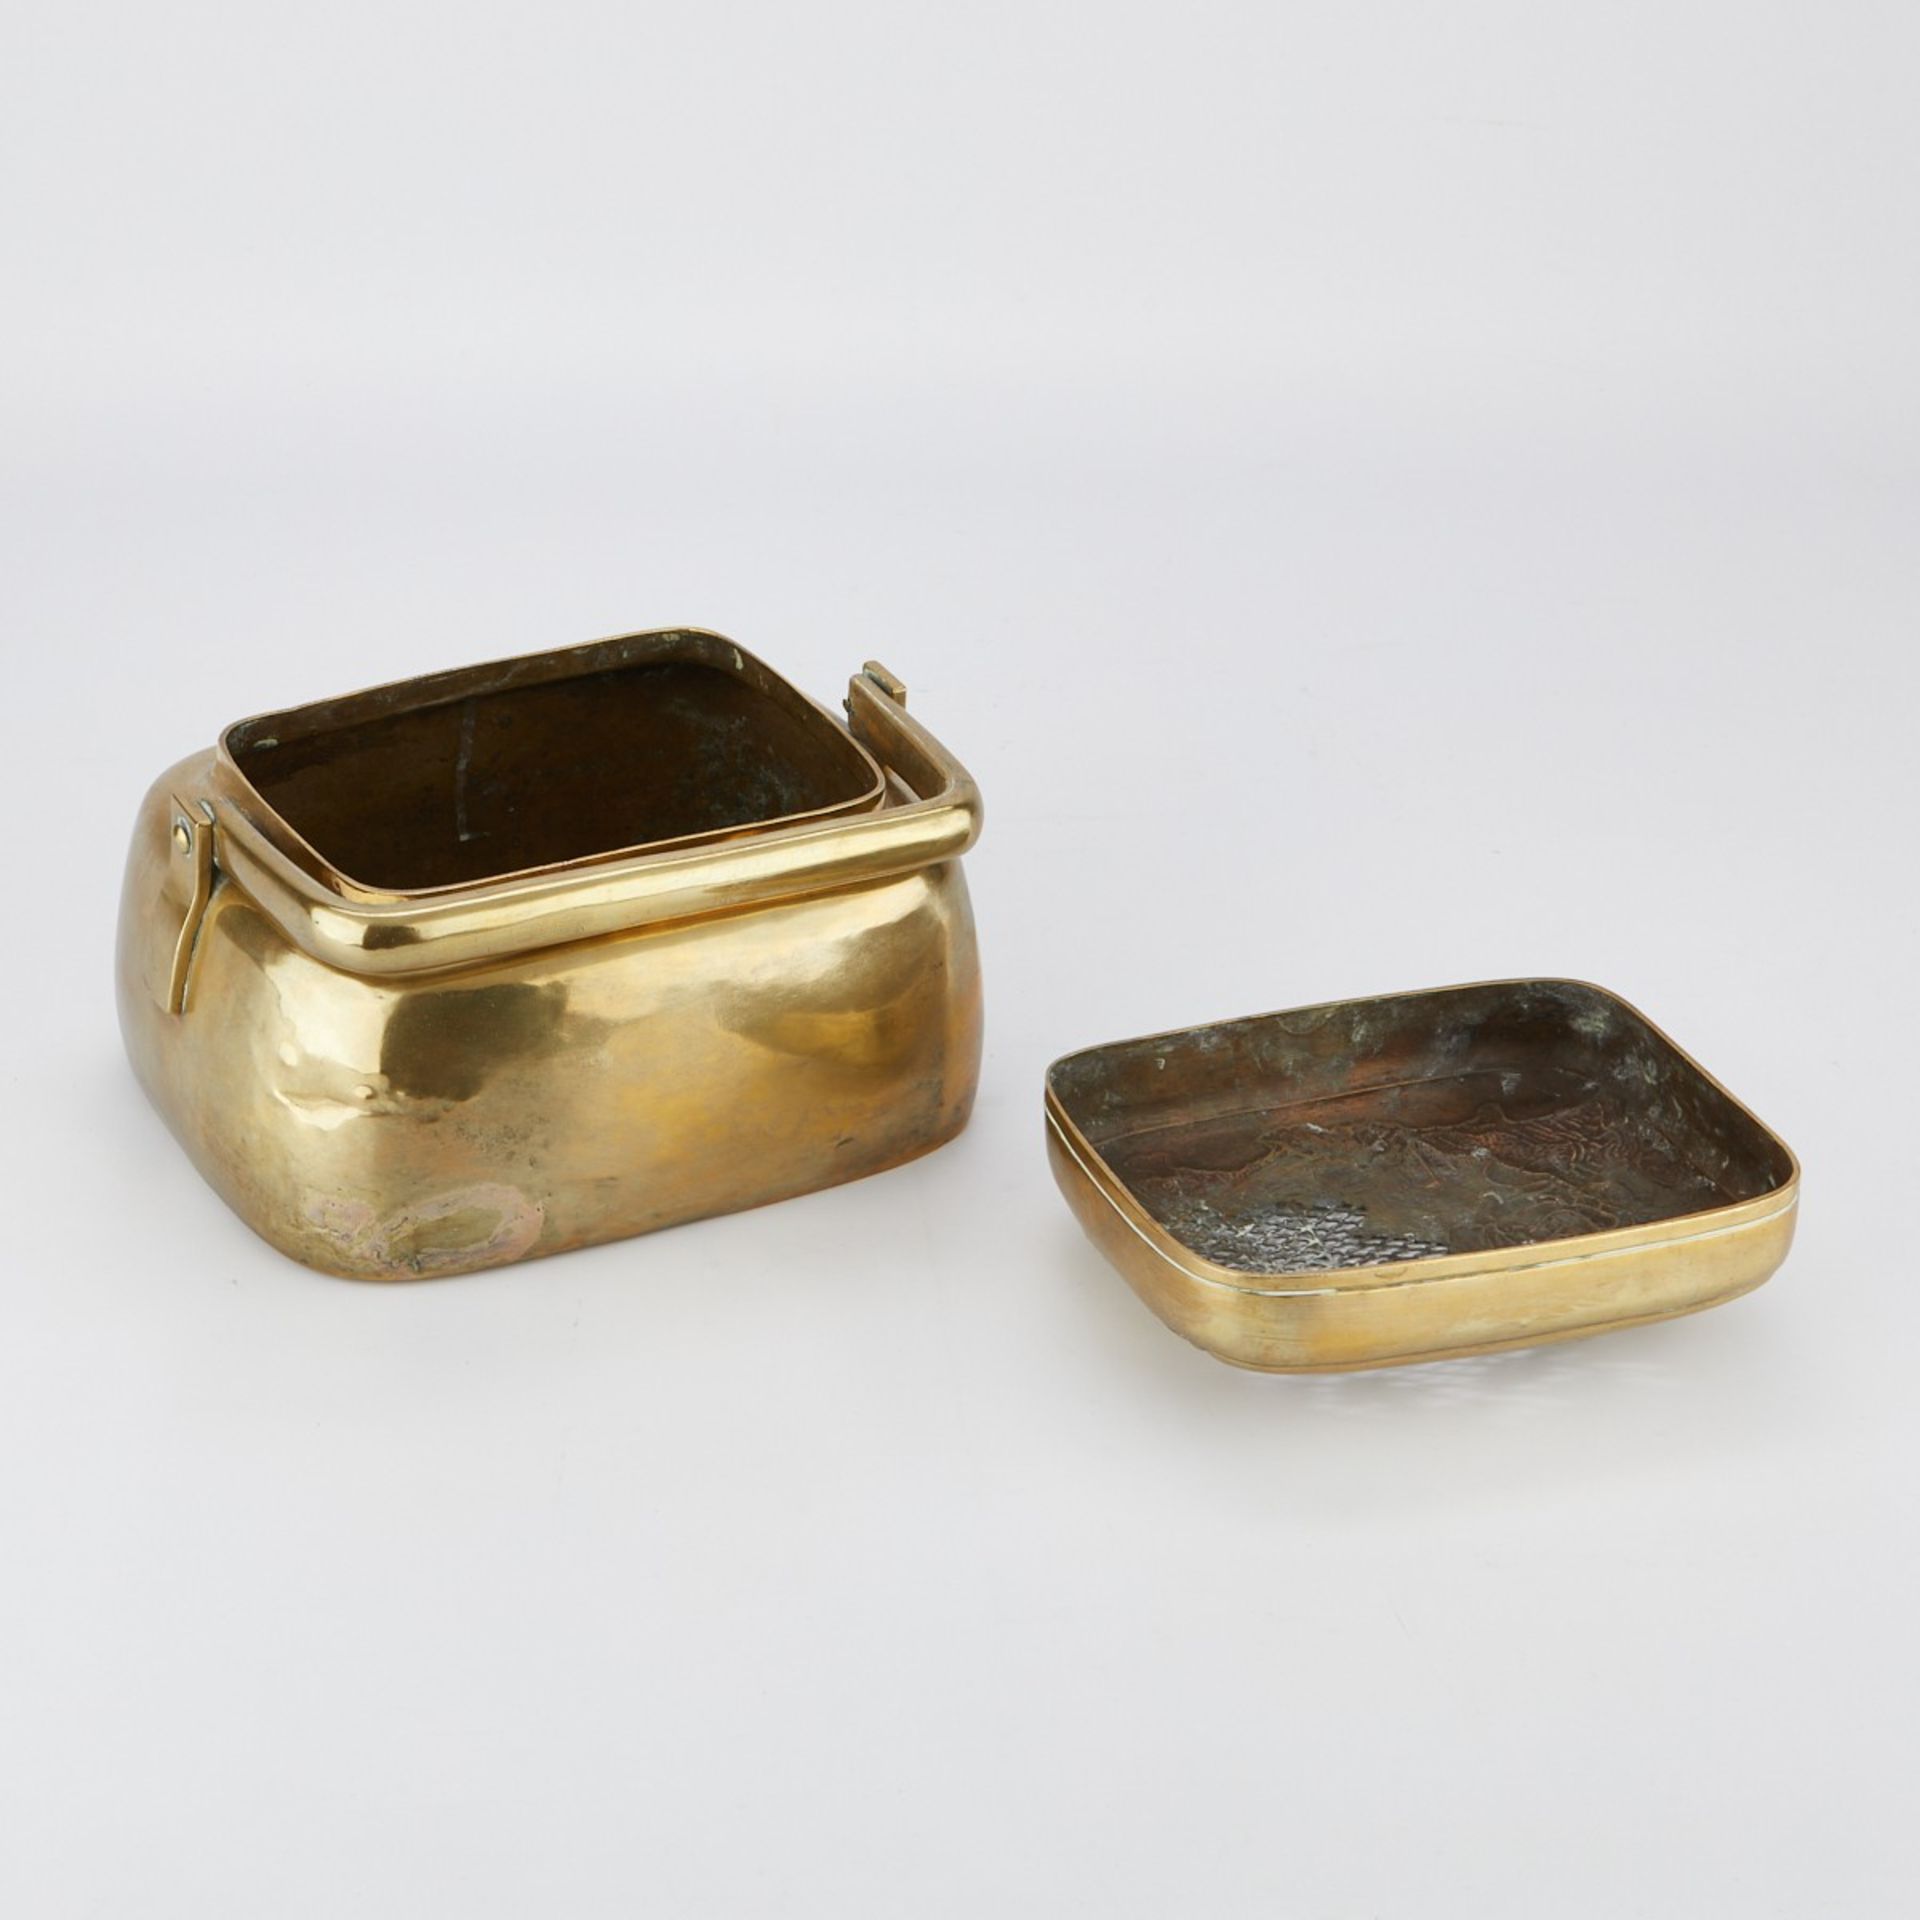 Lrg Chinese Qing Brass Hand Foot Warmer - Image 8 of 8